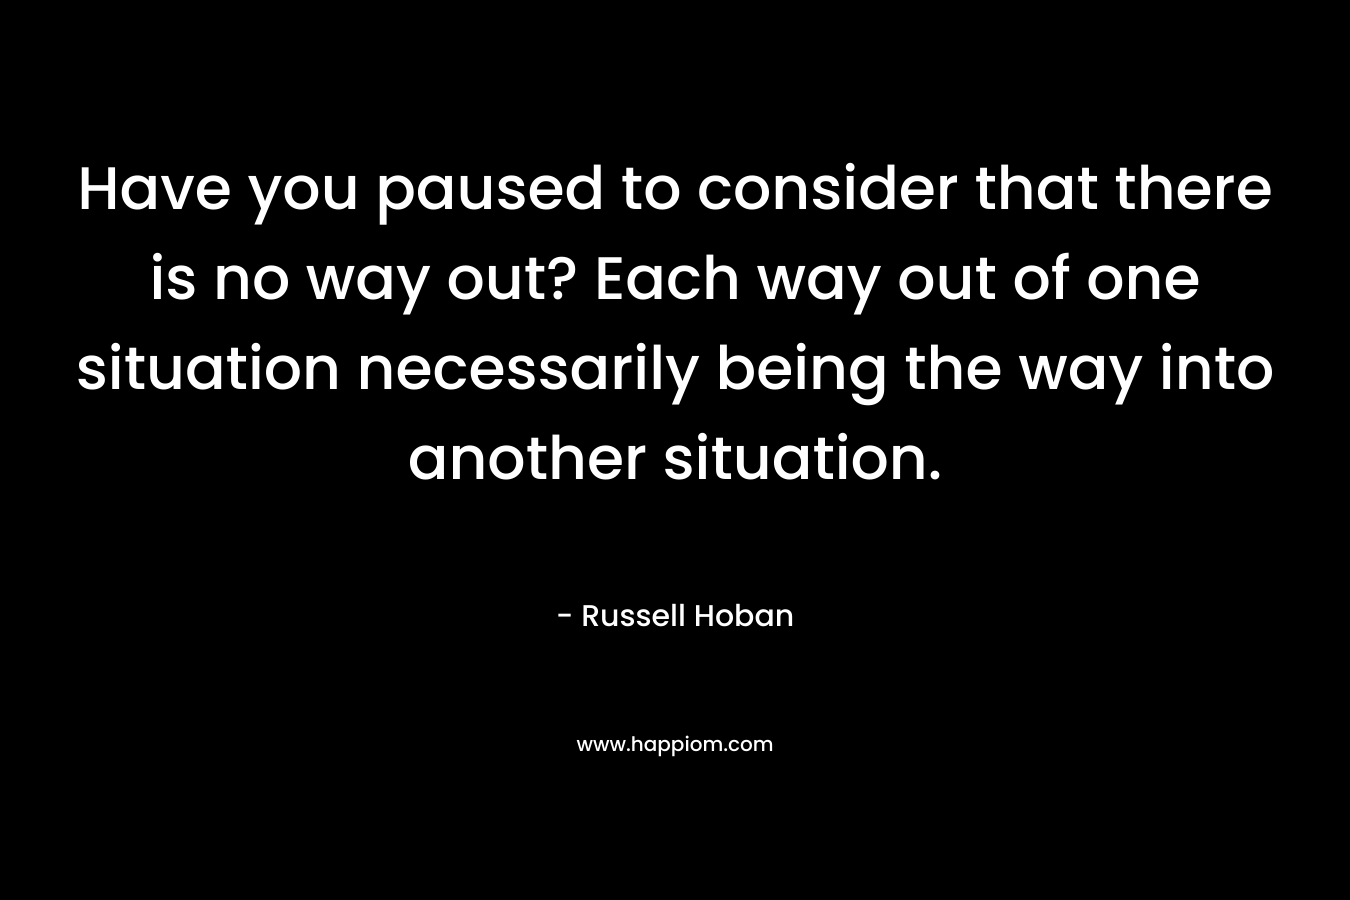 Have you paused to consider that there is no way out? Each way out of one situation necessarily being the way into another situation. – Russell Hoban